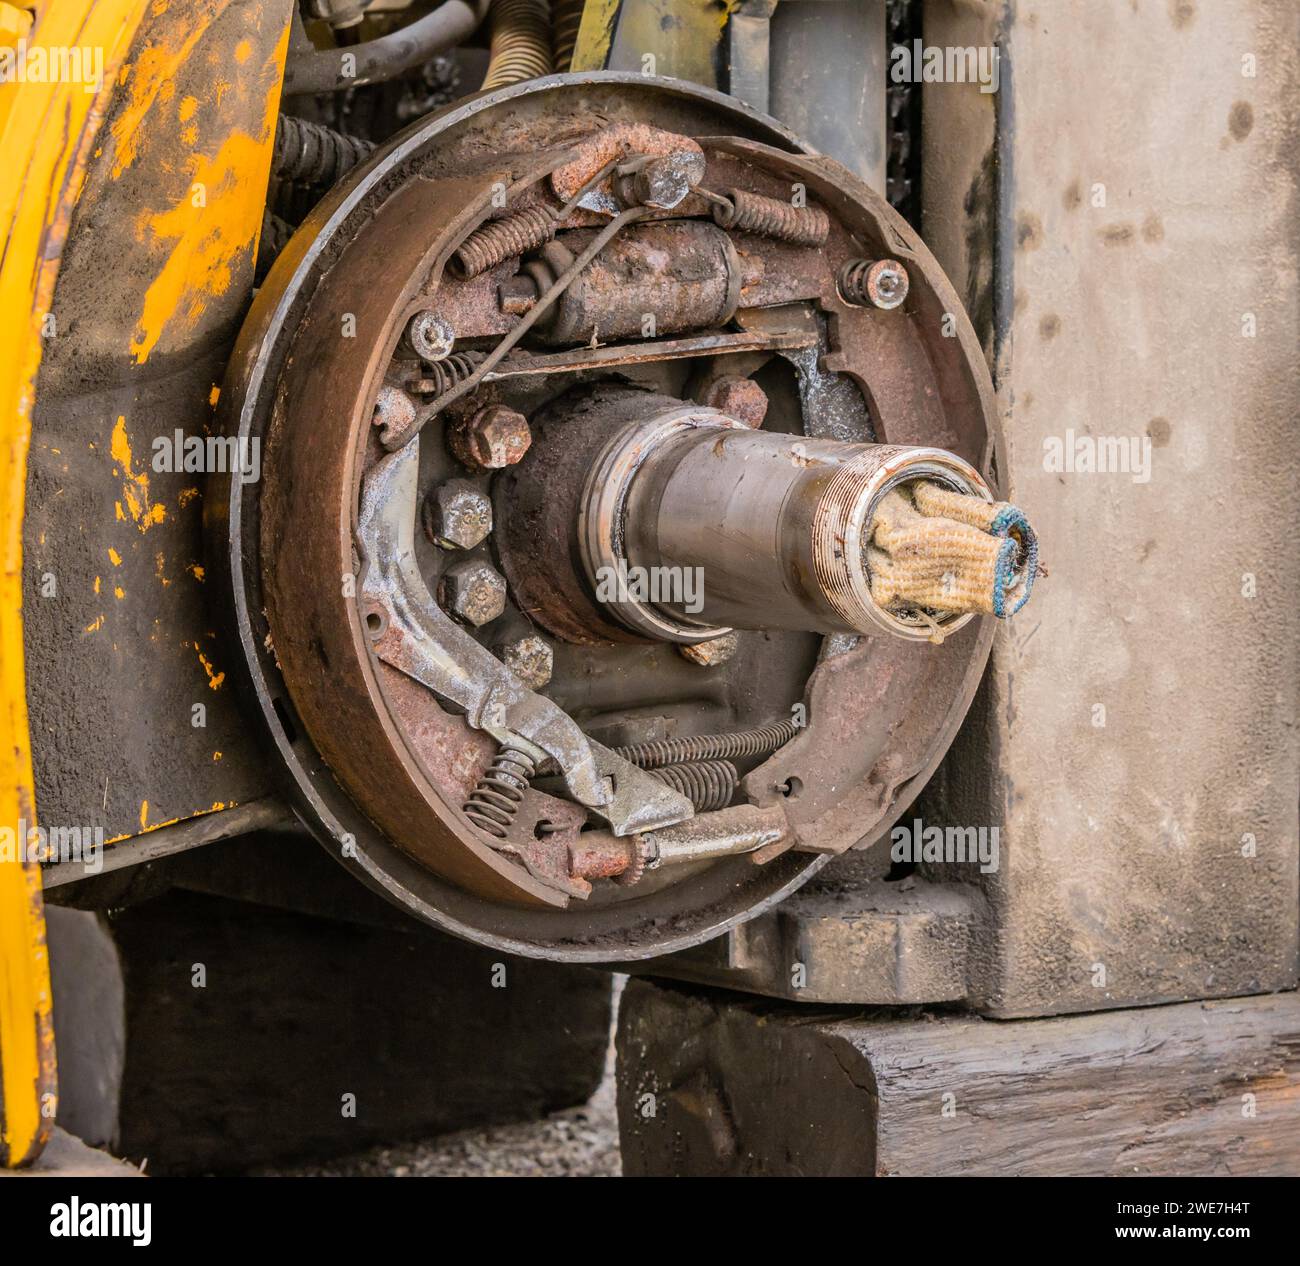 Closeup view of exposed rusty break shoe assembly and axle with dirty white cloth stuffed into open end of axle in South Korea Stock Photo